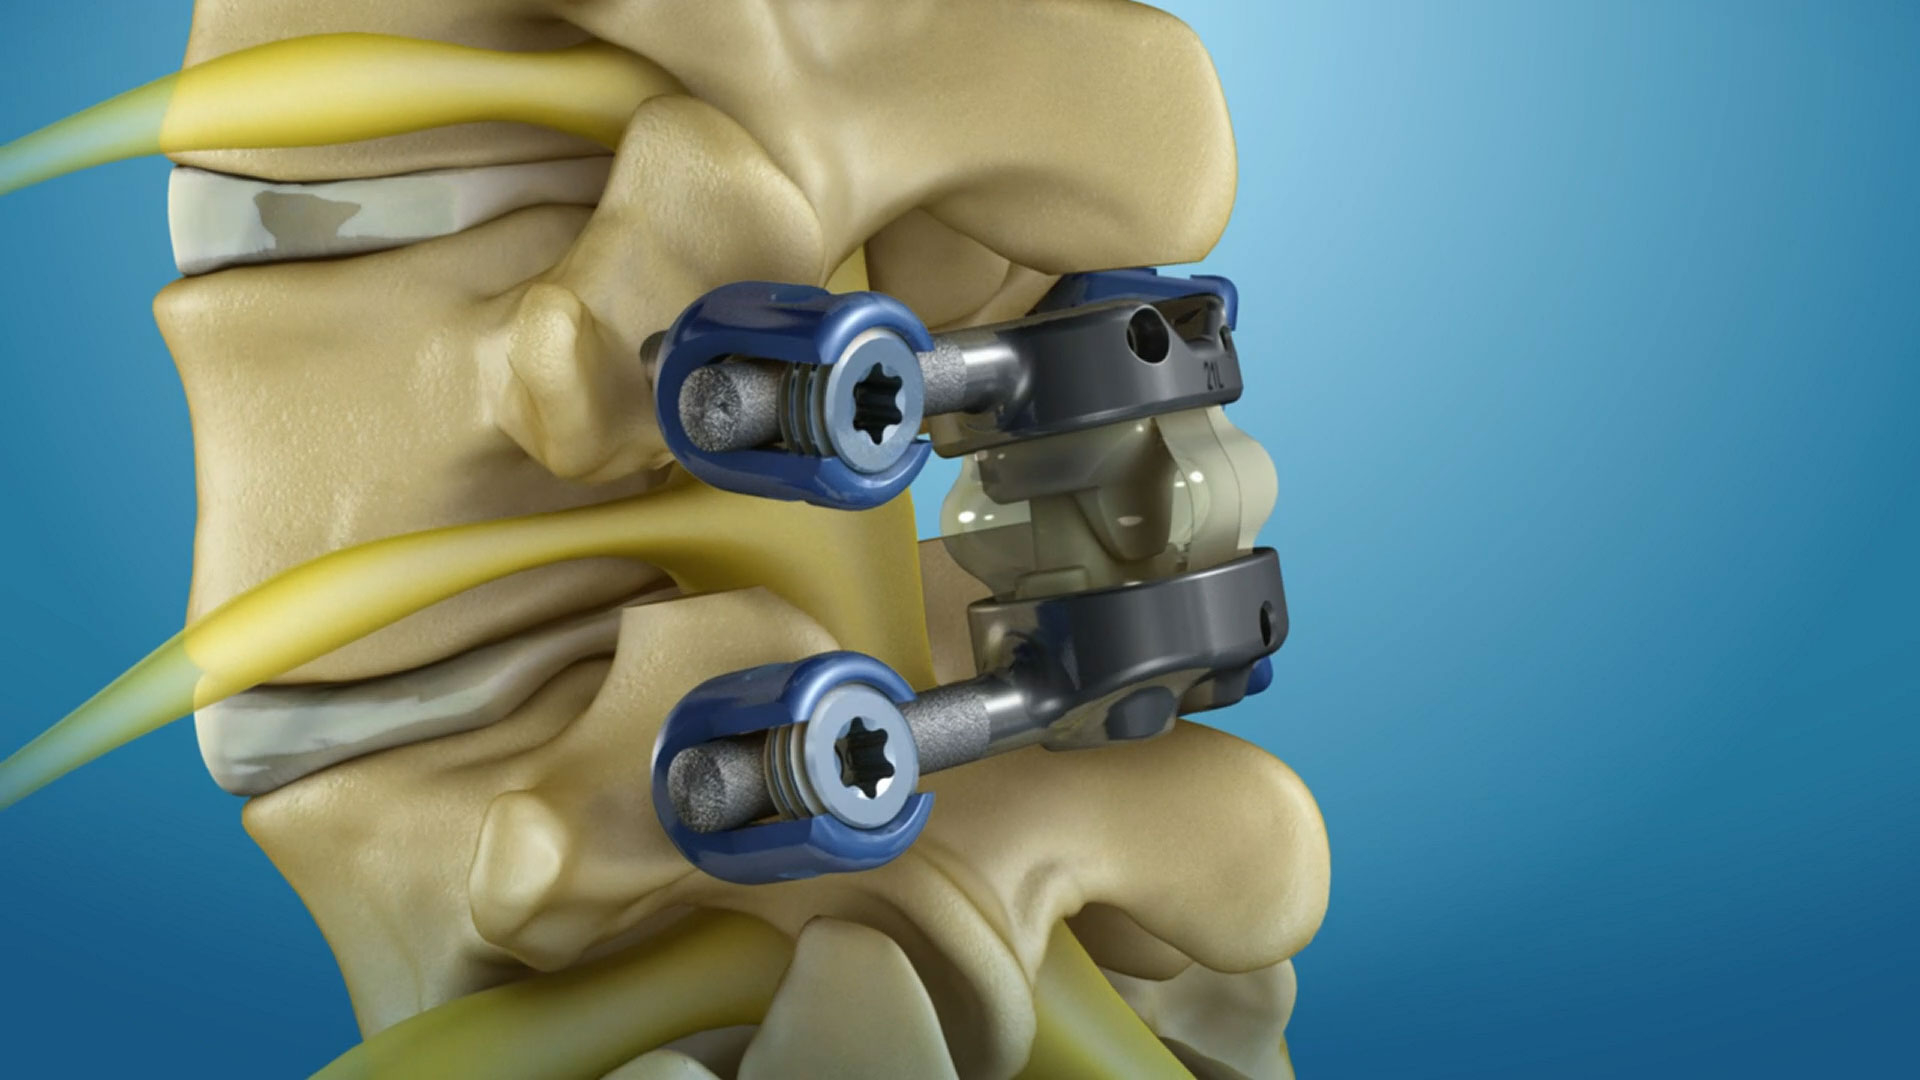 The TOPS System is a dynamic implant designed to stabilize the spine without fusing. The system is an articulating single-level prosthesis affixed to the spine by pedicle screws. Unlike fusion, it allows the spine to maintain mobility, flexibility and range of motion by providing physiologic multiaxial, three-column stabilization.